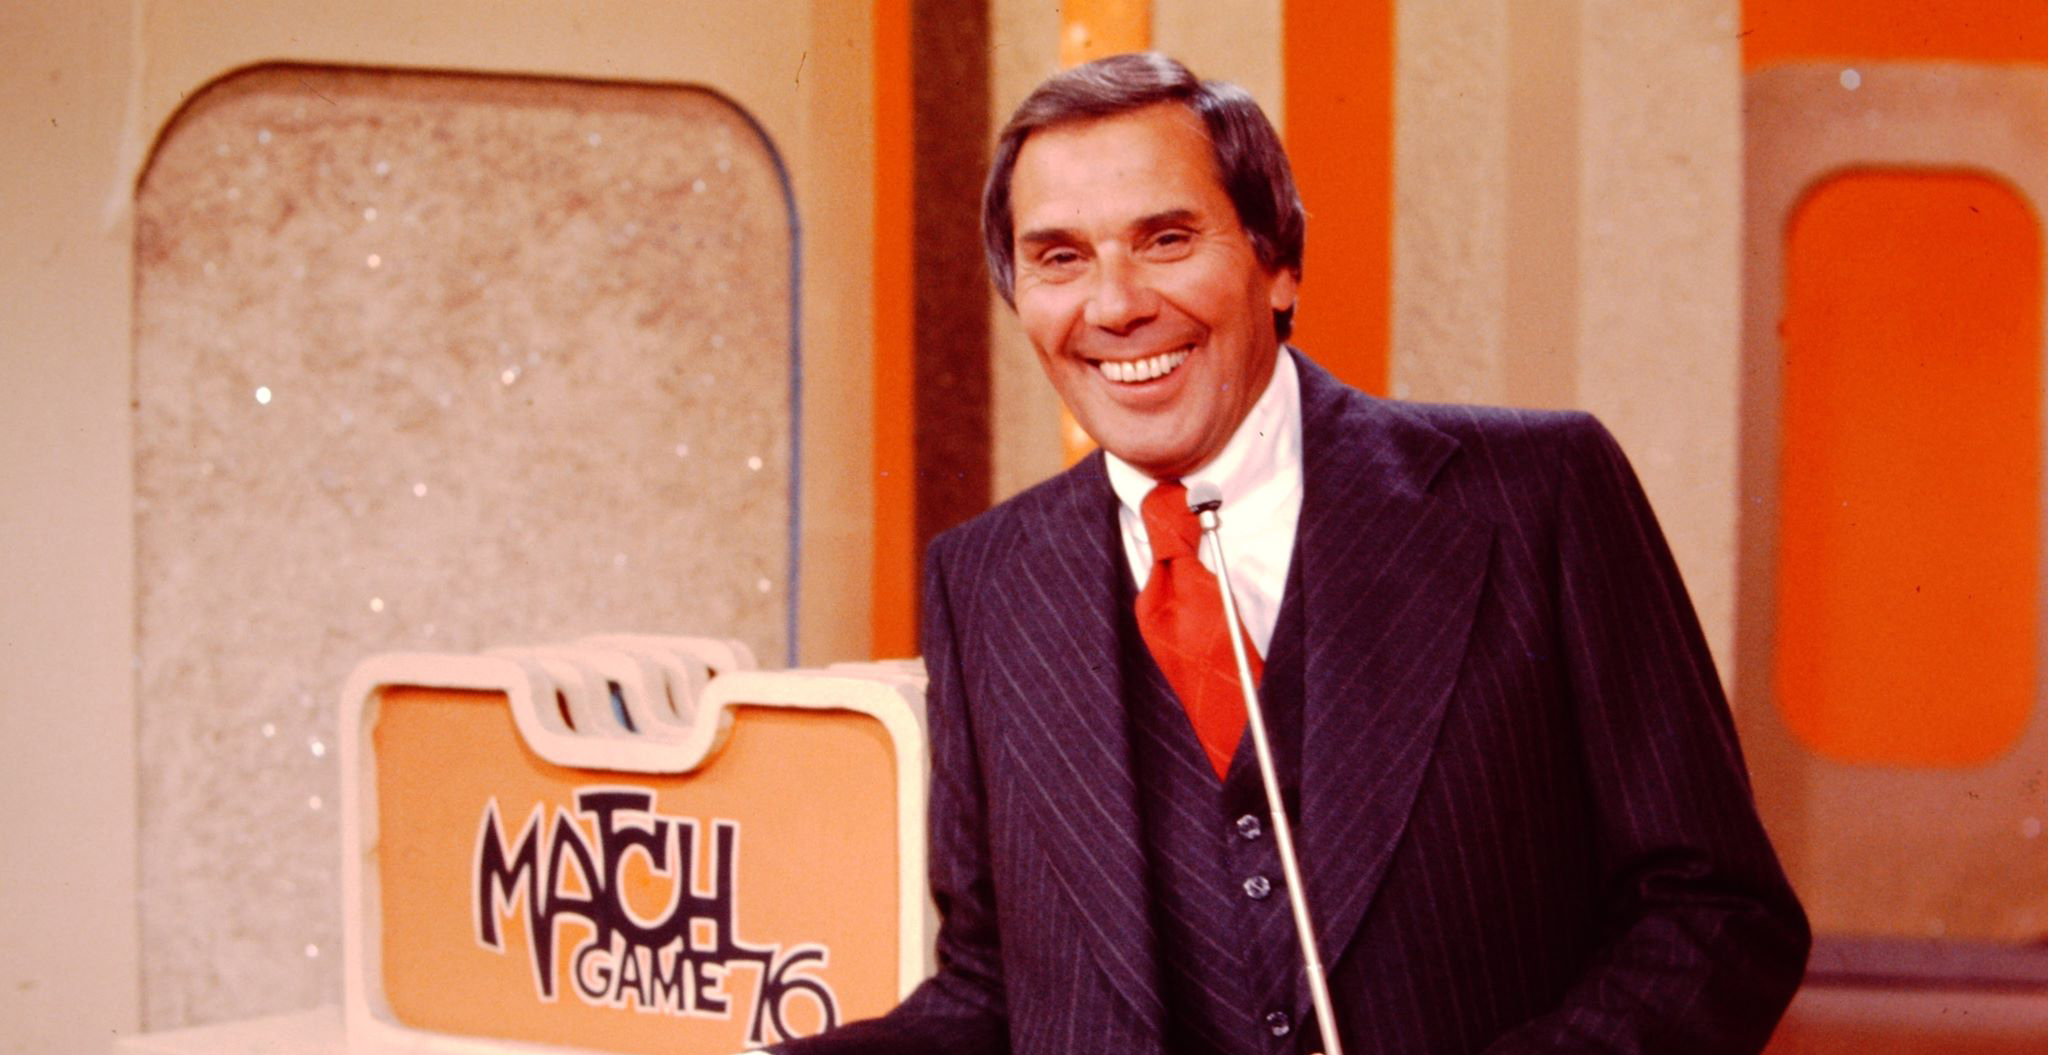 here-s-what-happened-to-match-game-host-gene-rayburn